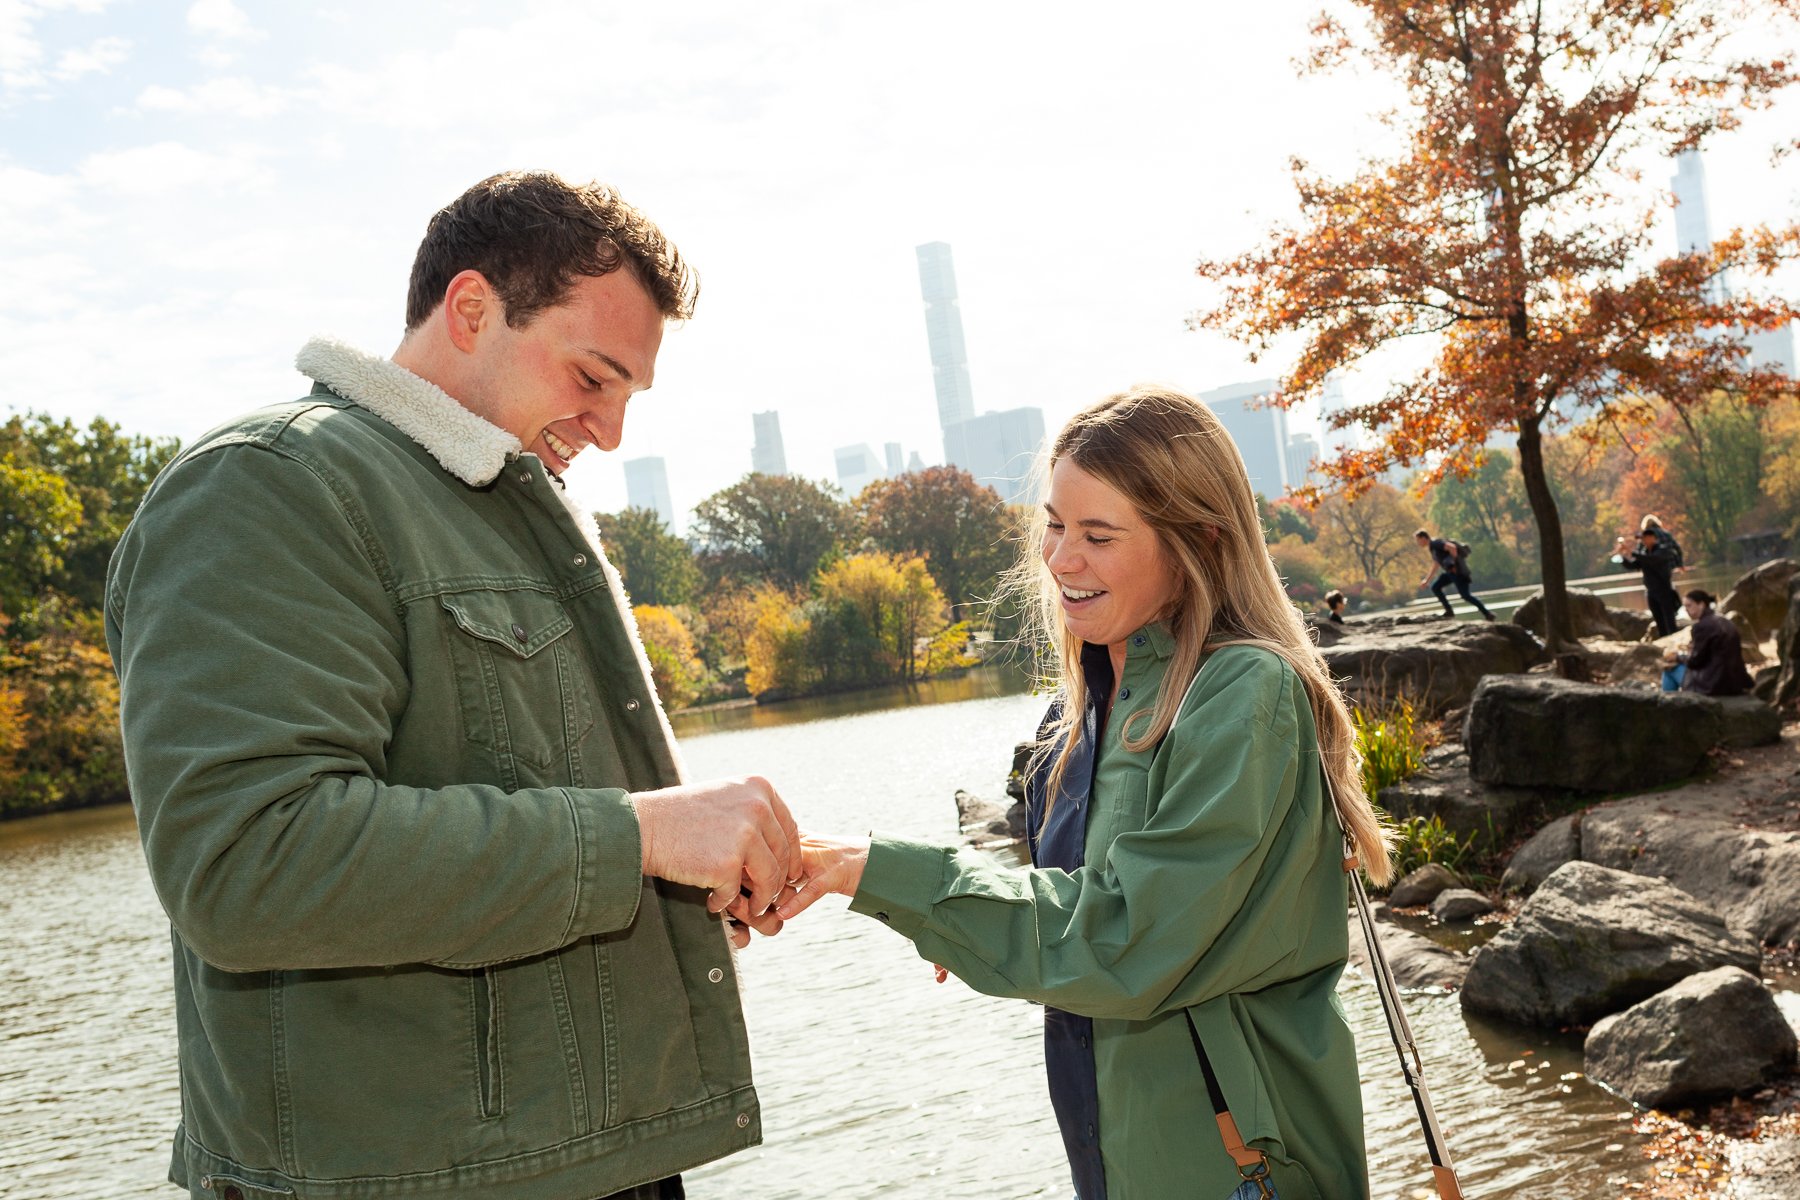 Central Park NYC Fall Foliage Proposal Photographer_0002.jpg